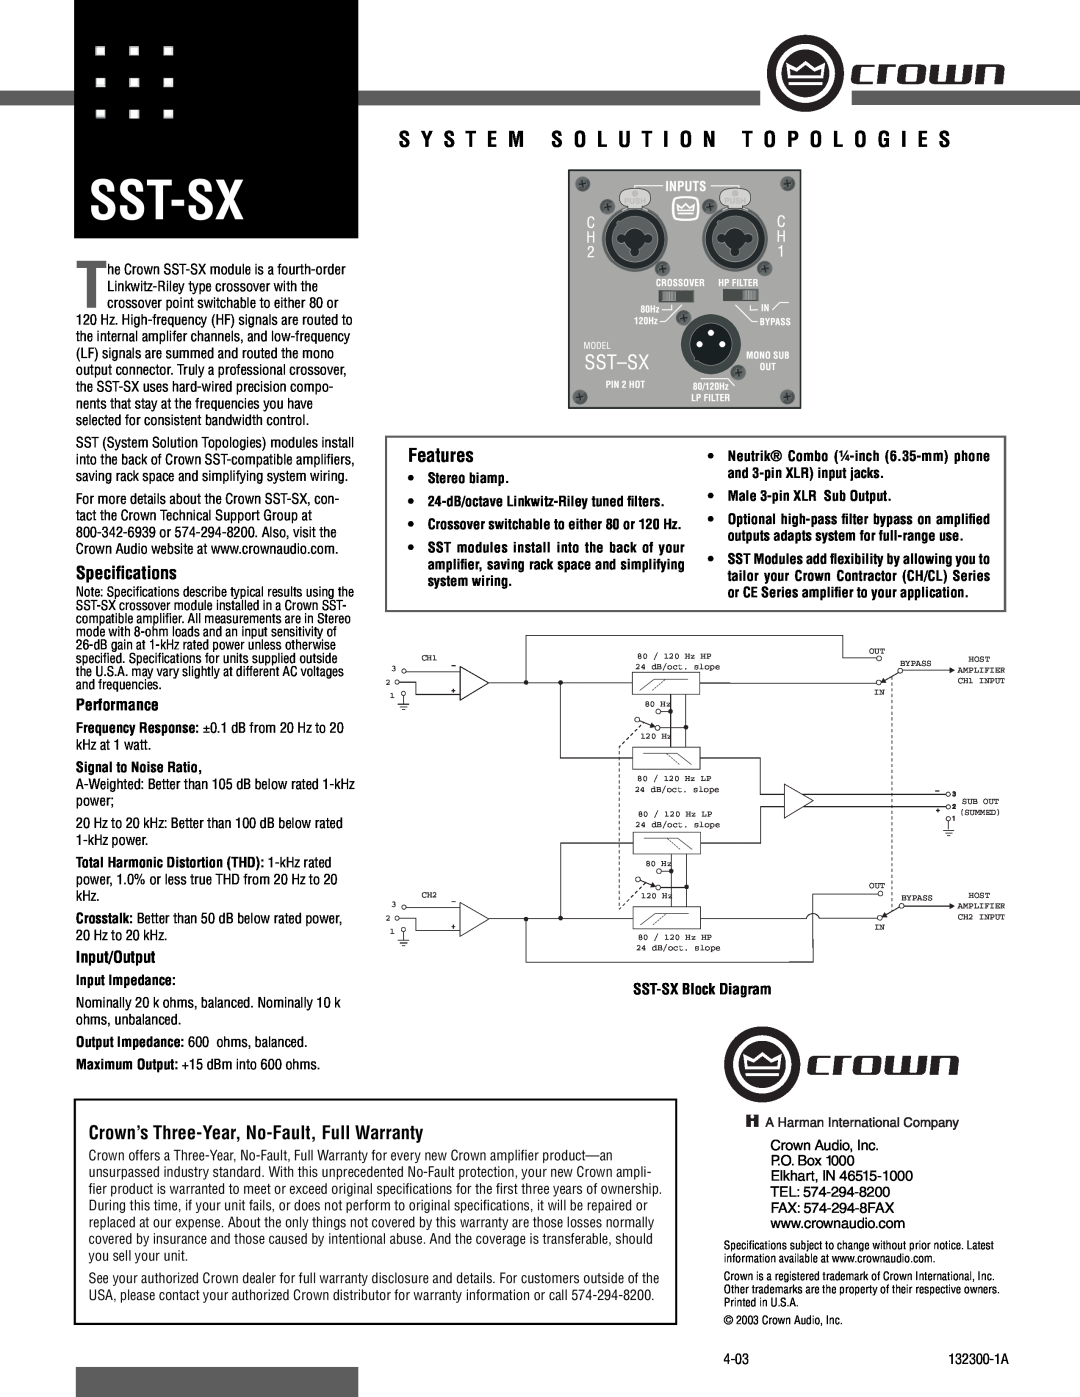 Crown Audio SST-SX specifications Sst-Sx, S Y S T E M S O L U T I O N T O P O L O G I E S, Features, Speciﬁcations 